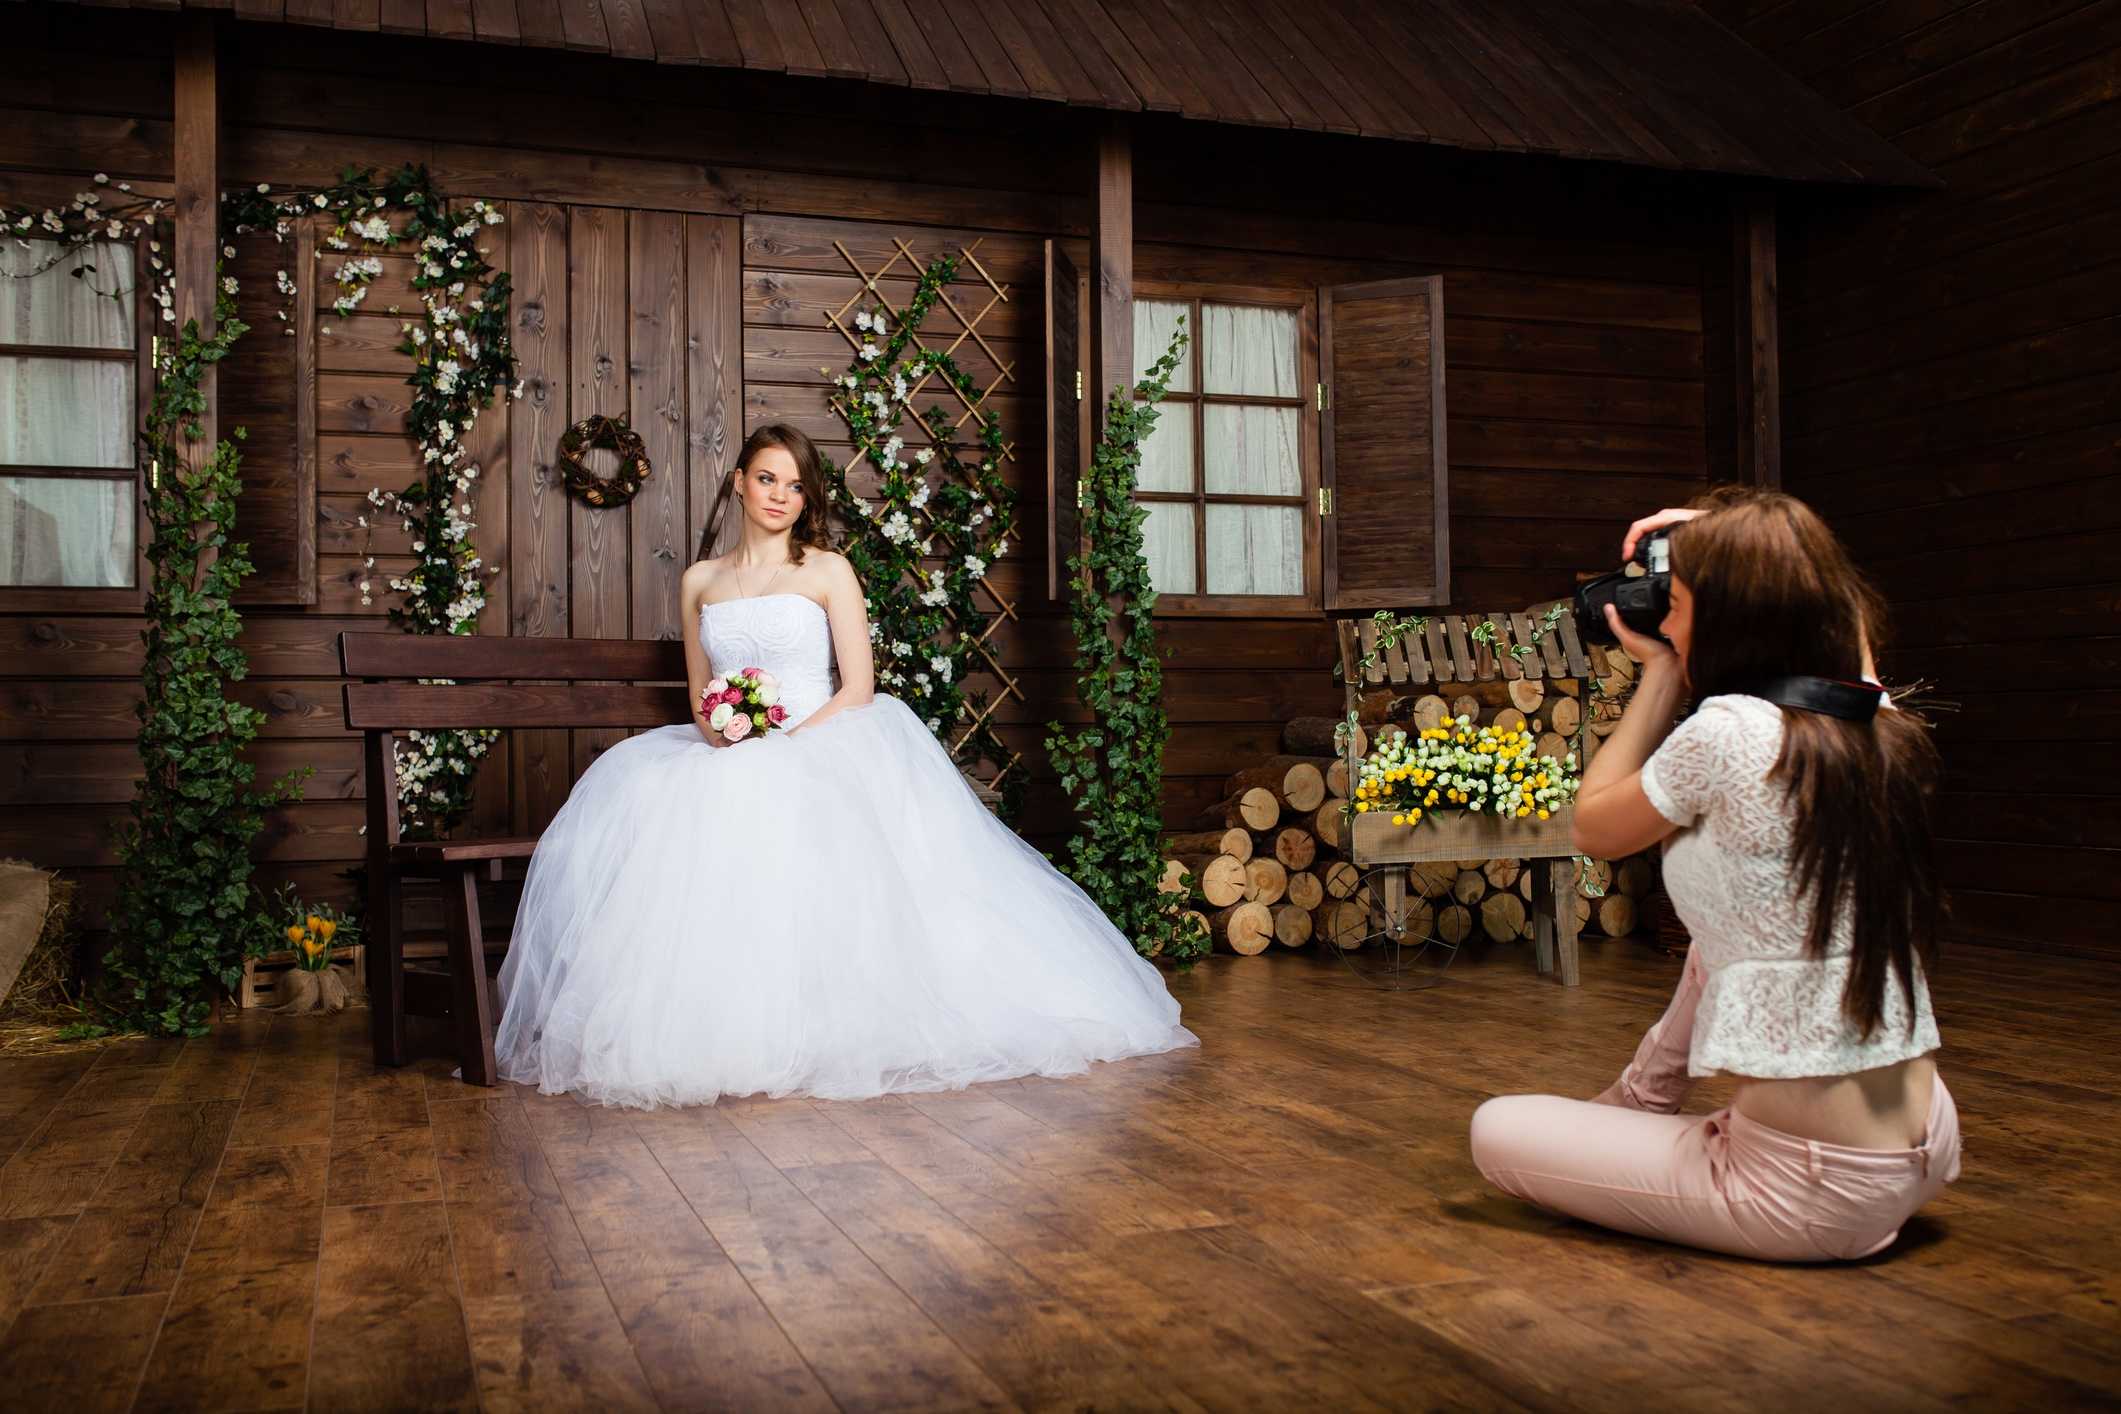 A bride poses for her wedding photography.